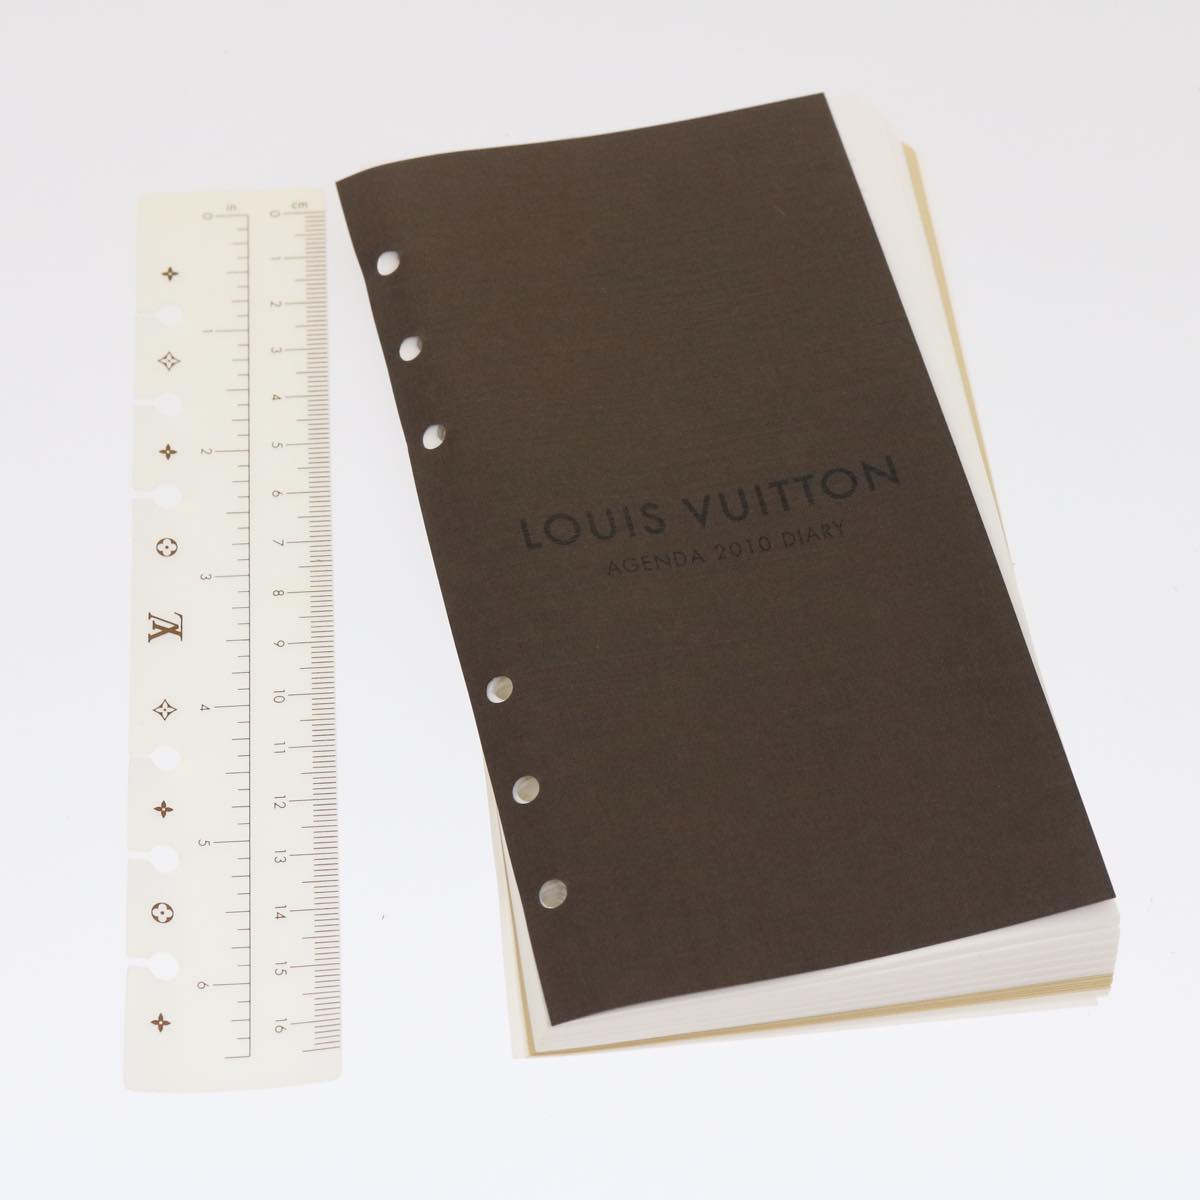 LOUIS VUITTON Nomad Agenda MM Day Planner Cover Brown R20105 LV Auth 29827